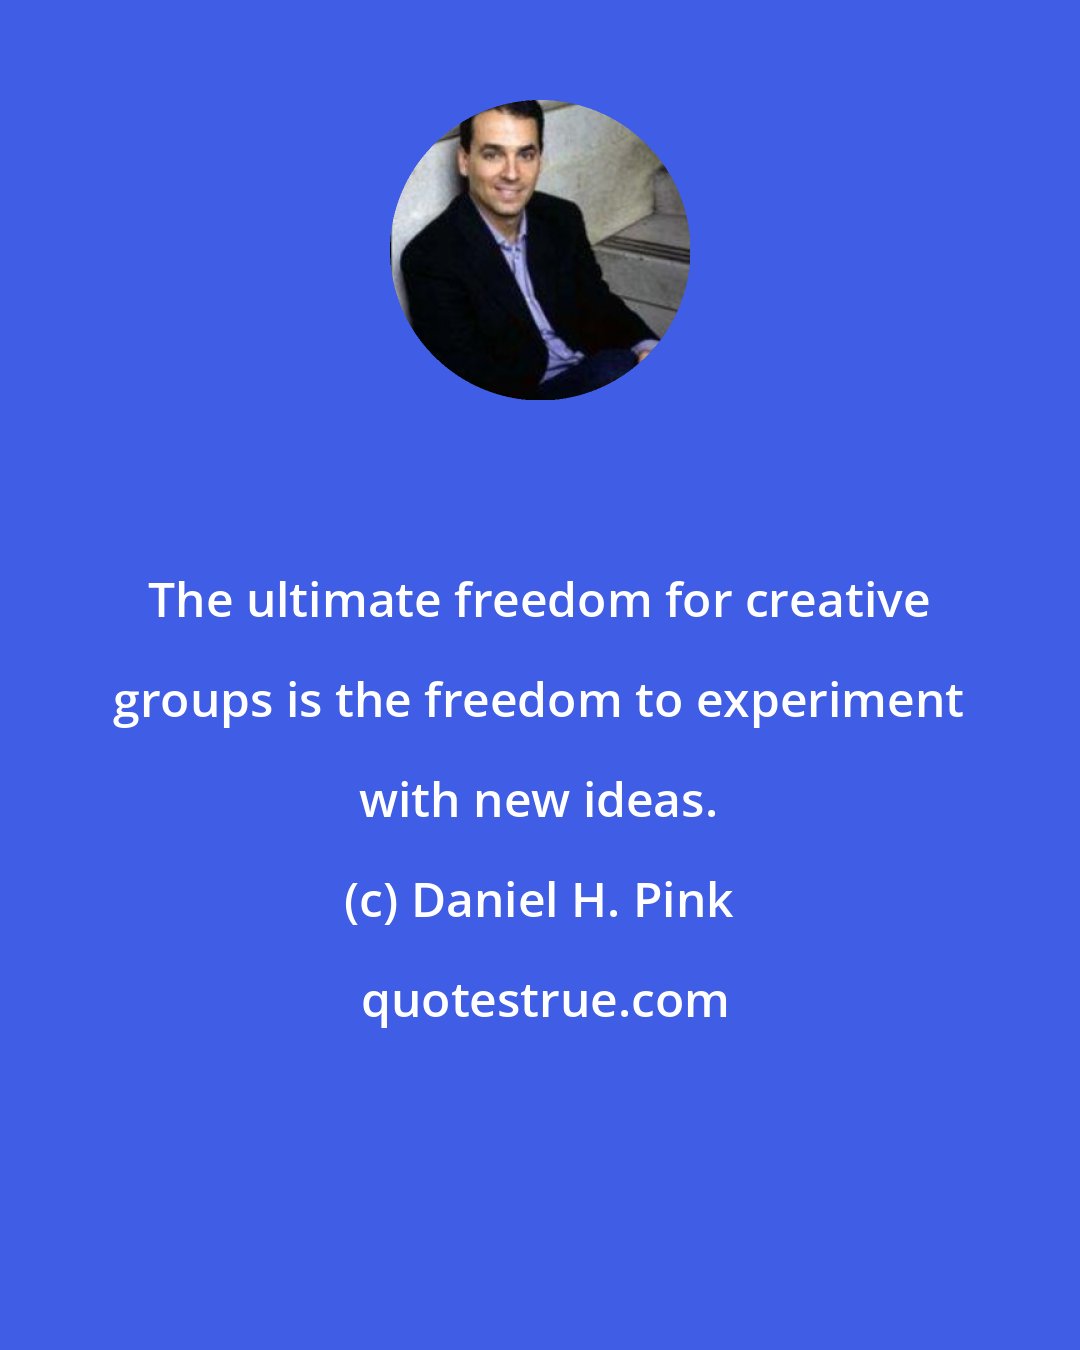 Daniel H. Pink: The ultimate freedom for creative groups is the freedom to experiment with new ideas.